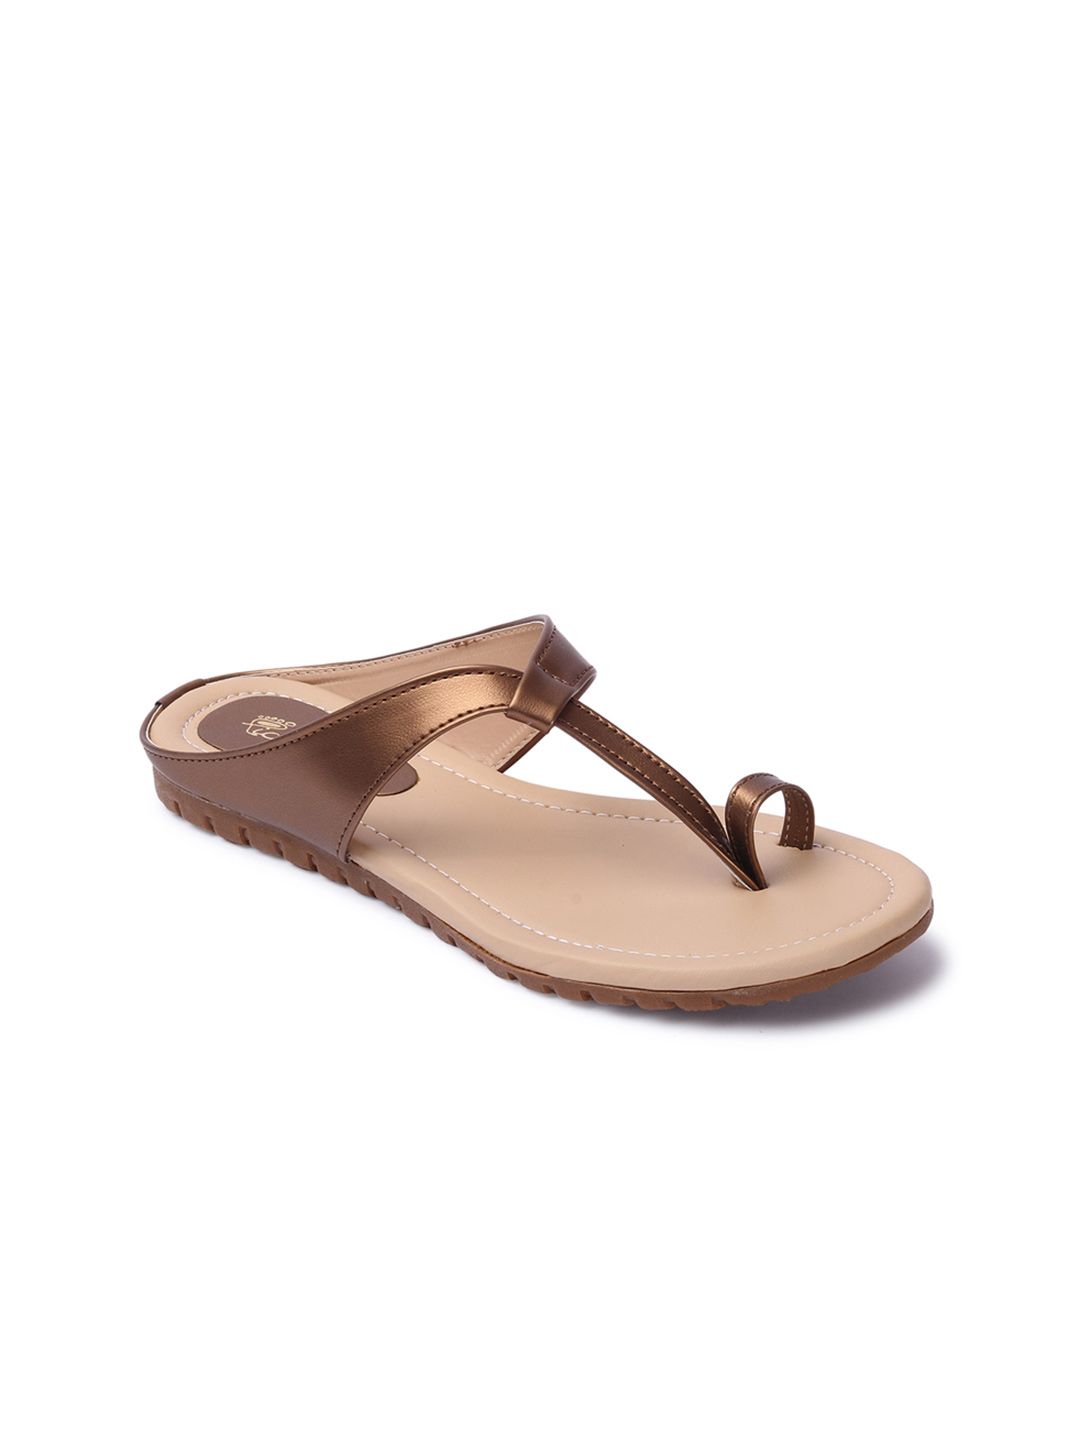 Picktoes Women Copper-Toned One Toe Flats Price in India